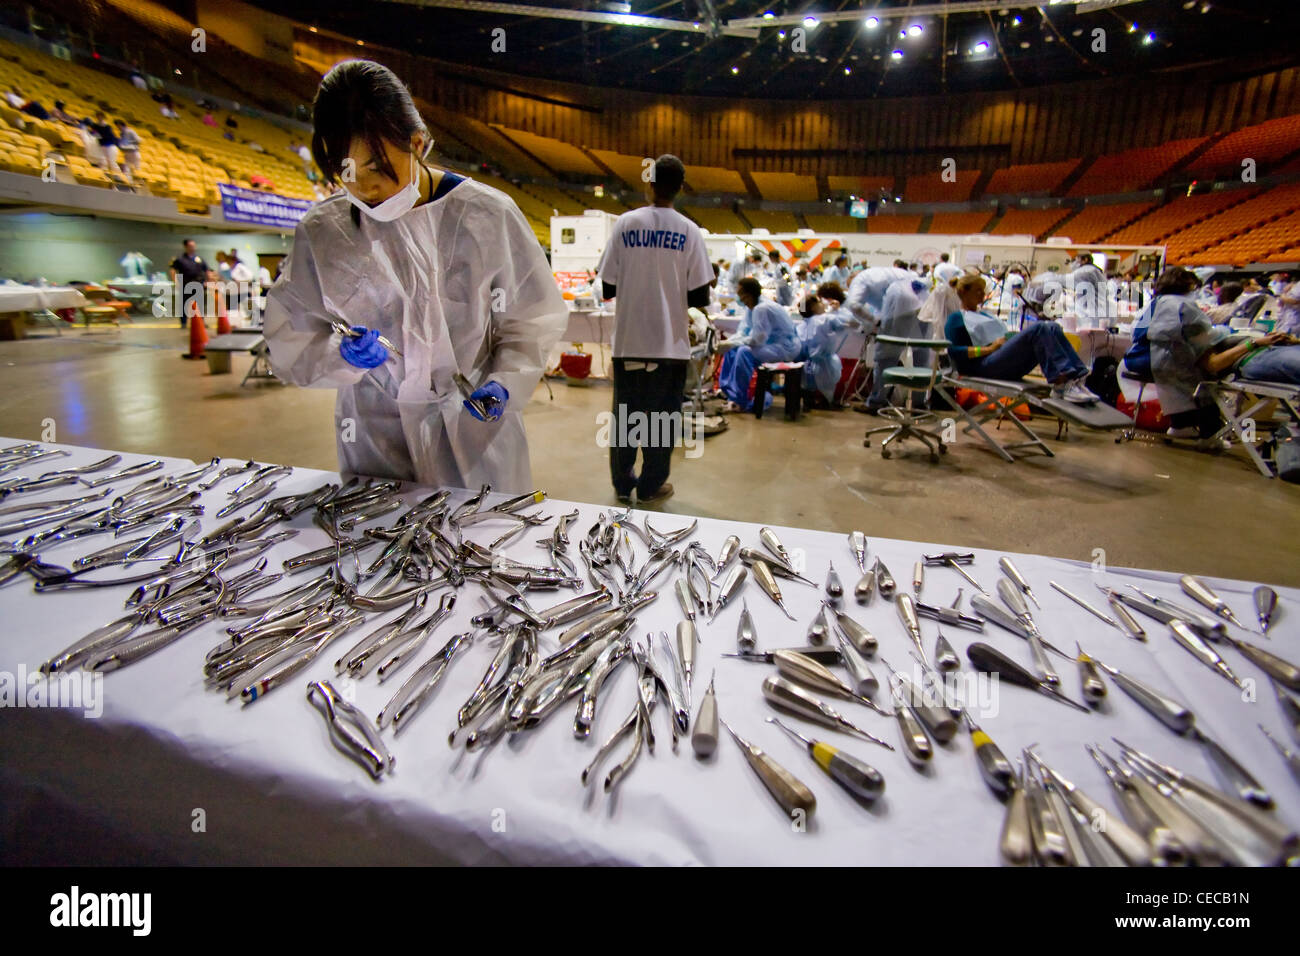 Asian woman volunteer dentist selects sterilized instruments laid out on a long table Stock Photo